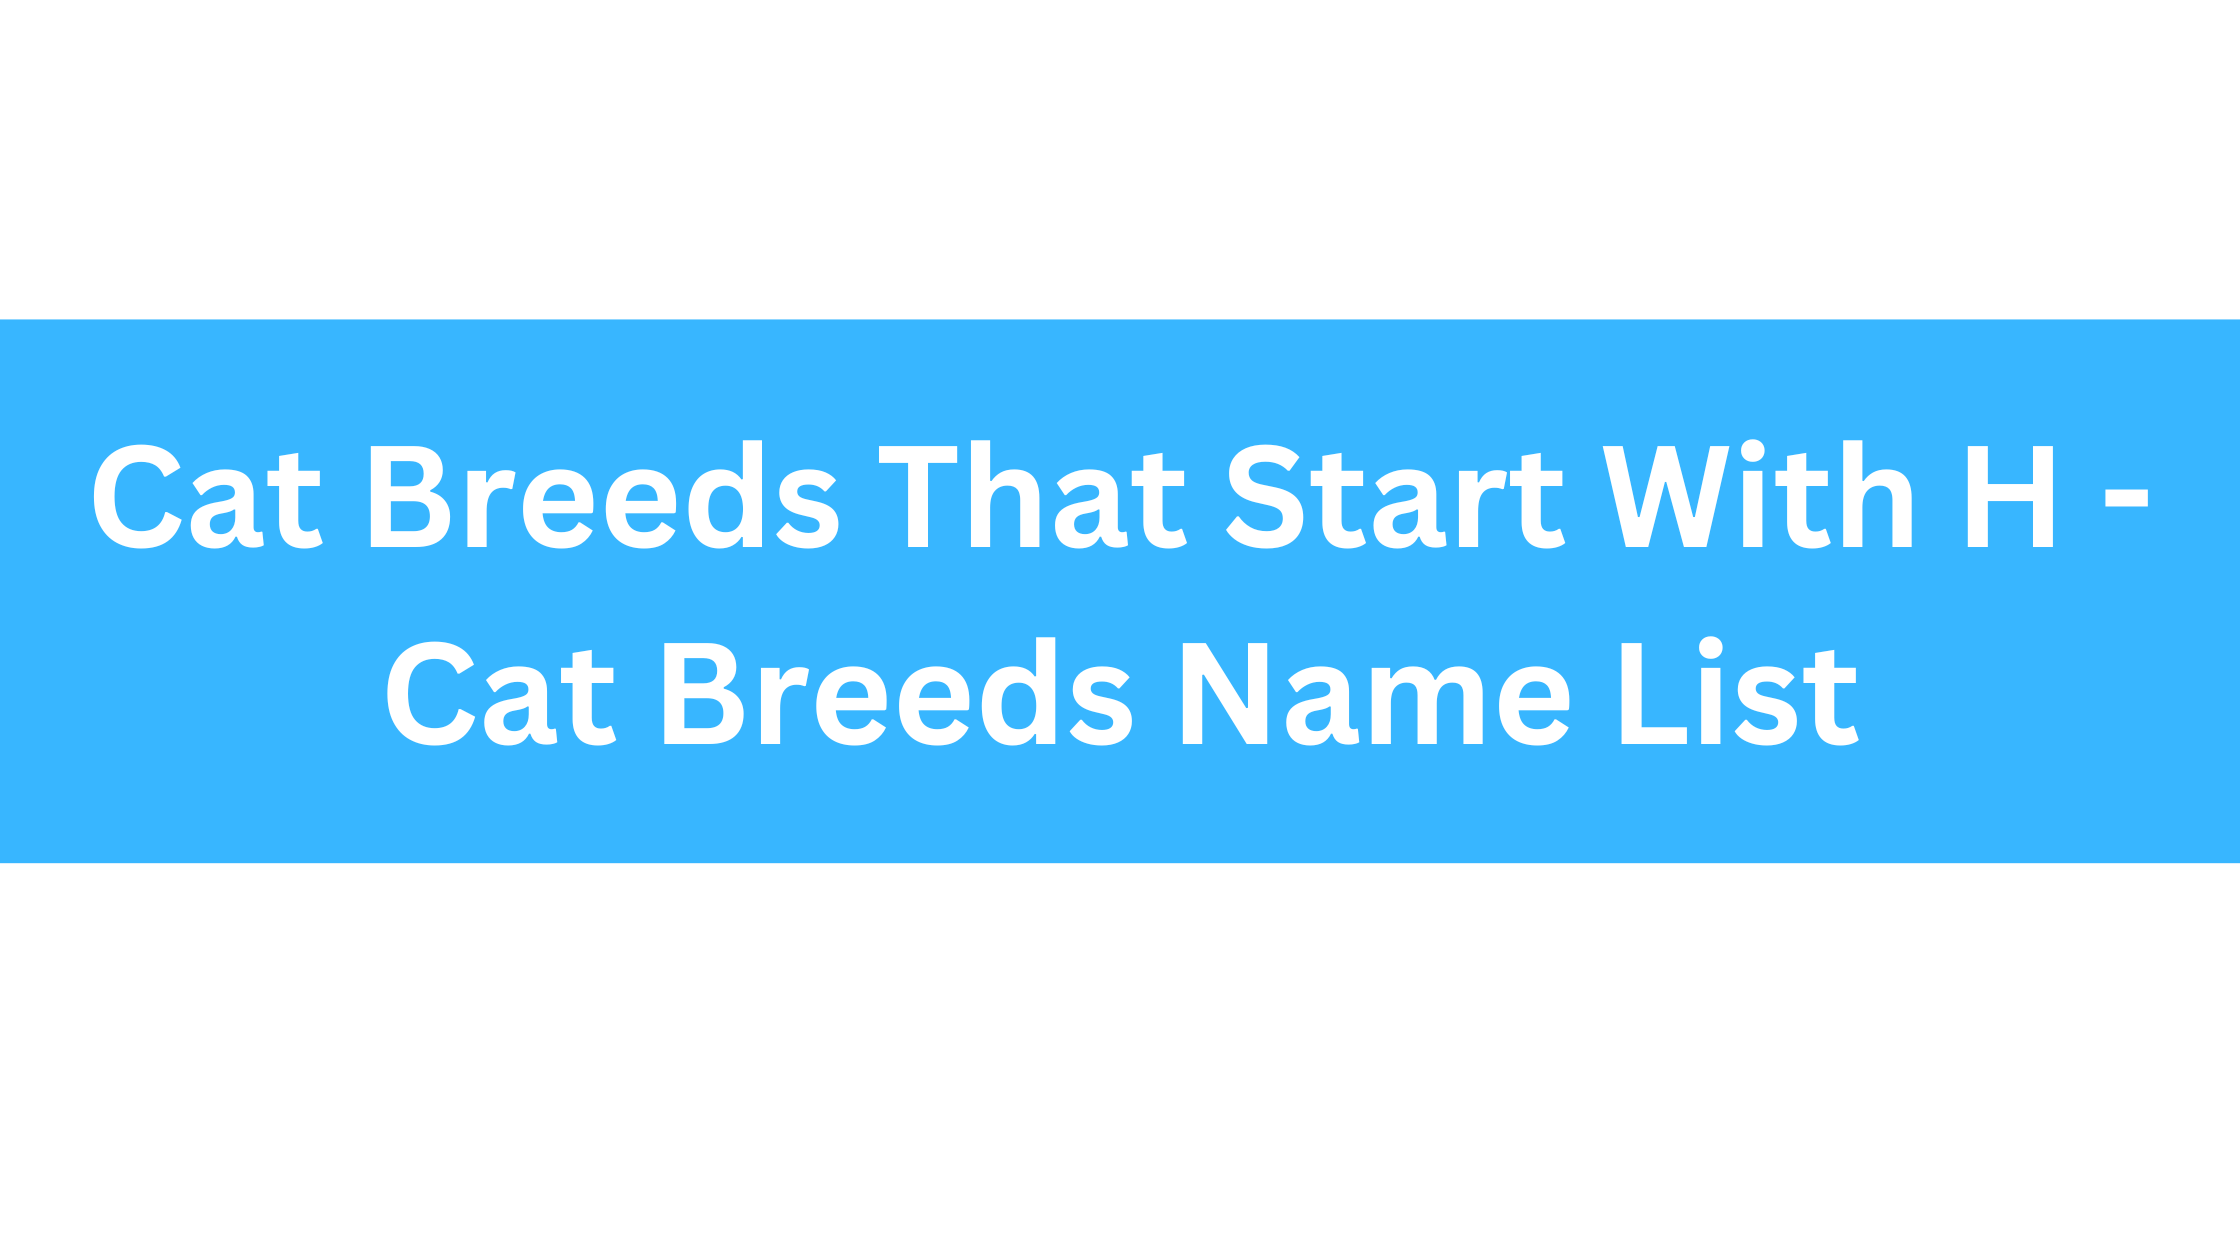 Cat Breeds That Start With H